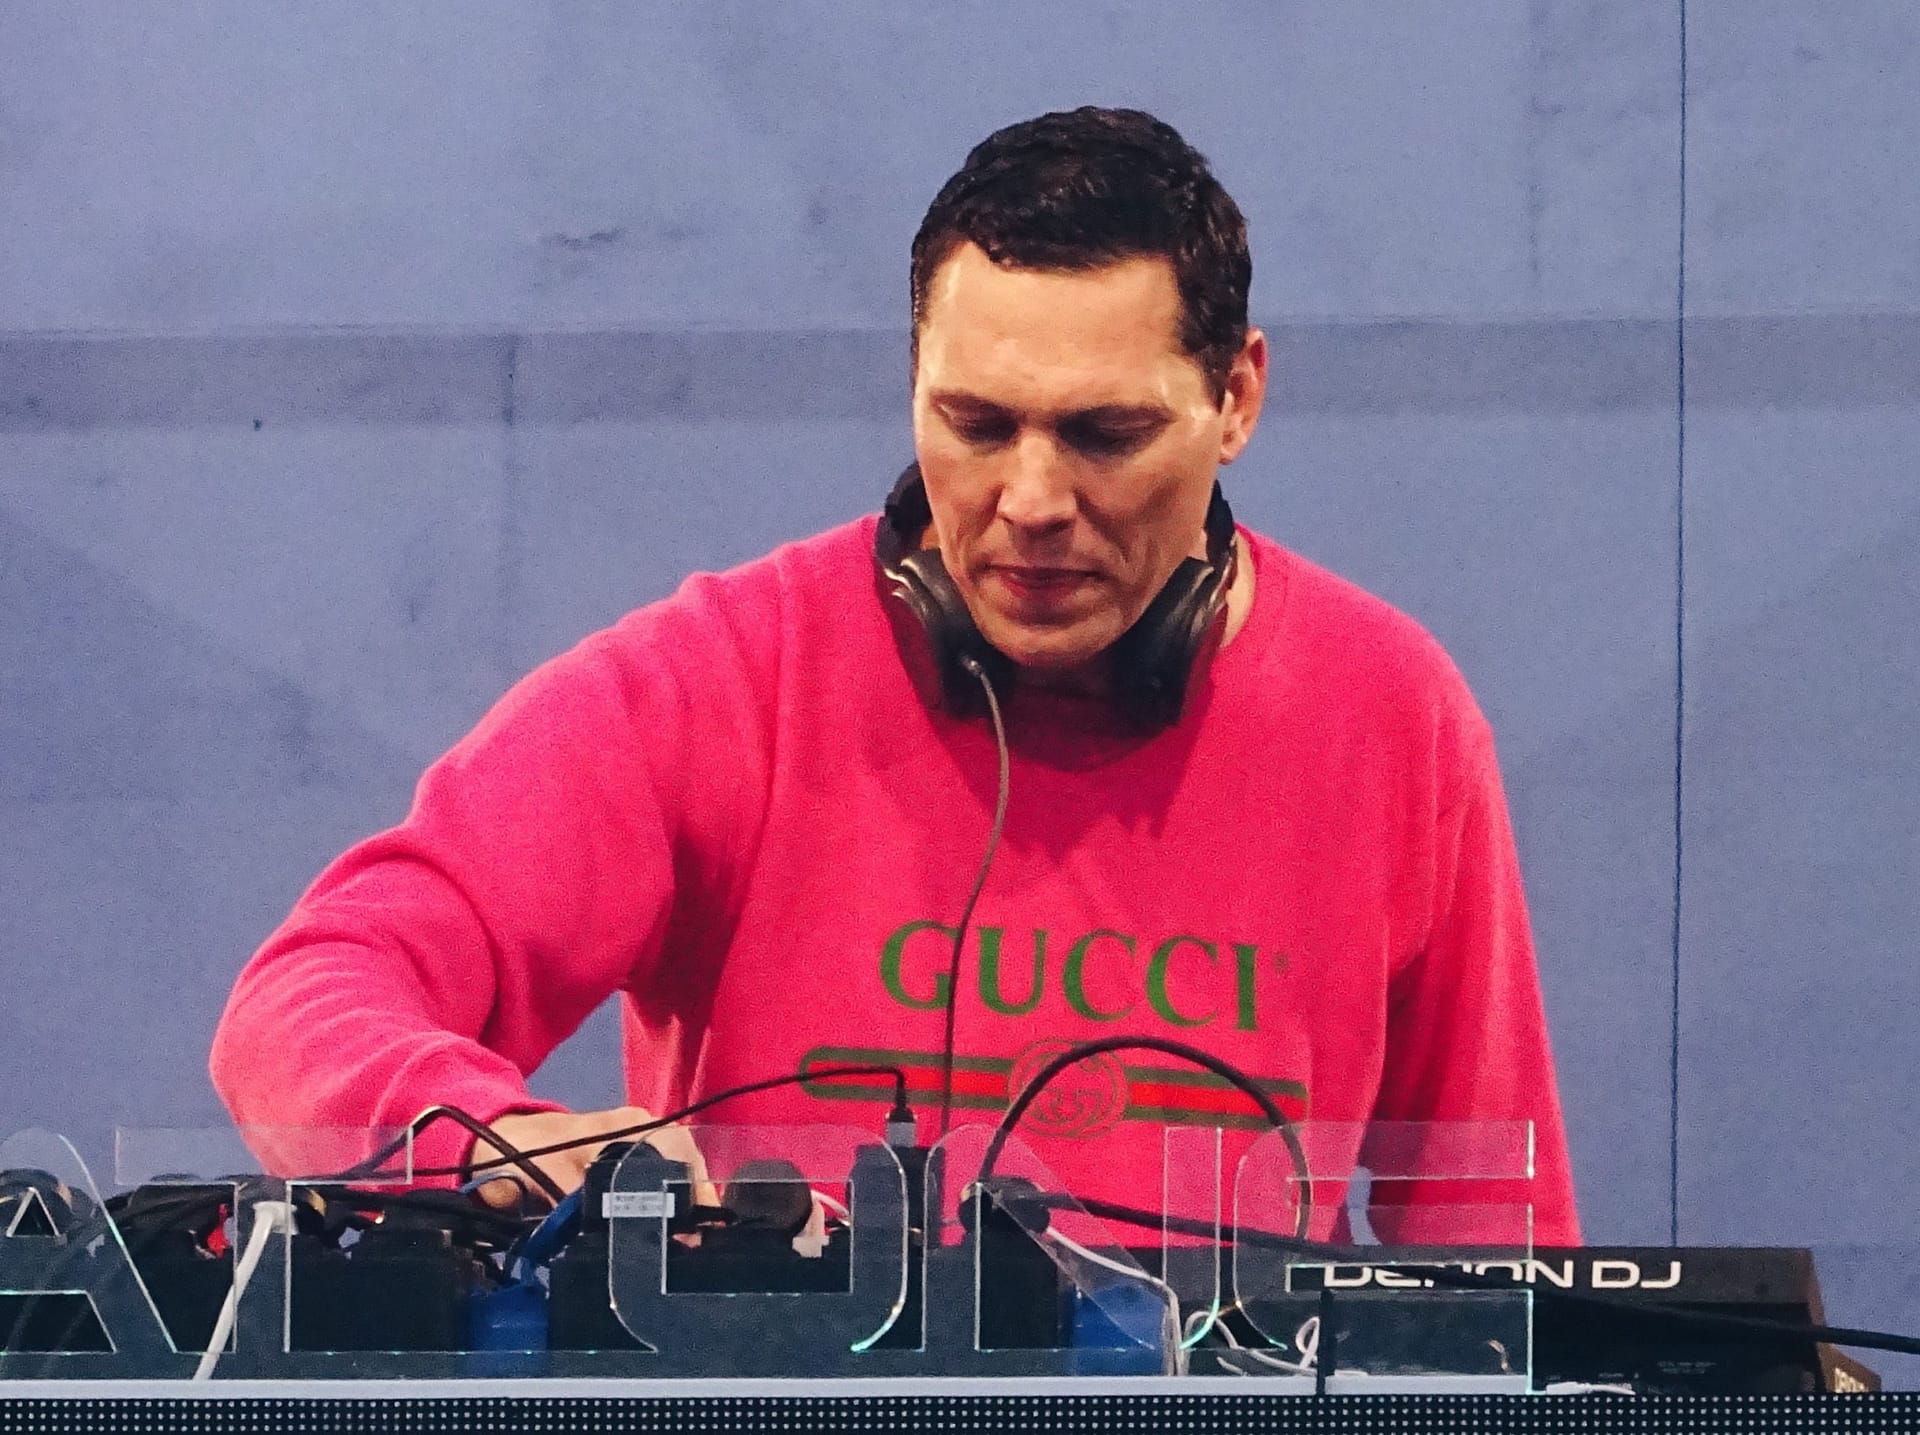 Tiësto @ Airbeat One 2017 scaled - Are you a true Tiesto fan? Come check it out!